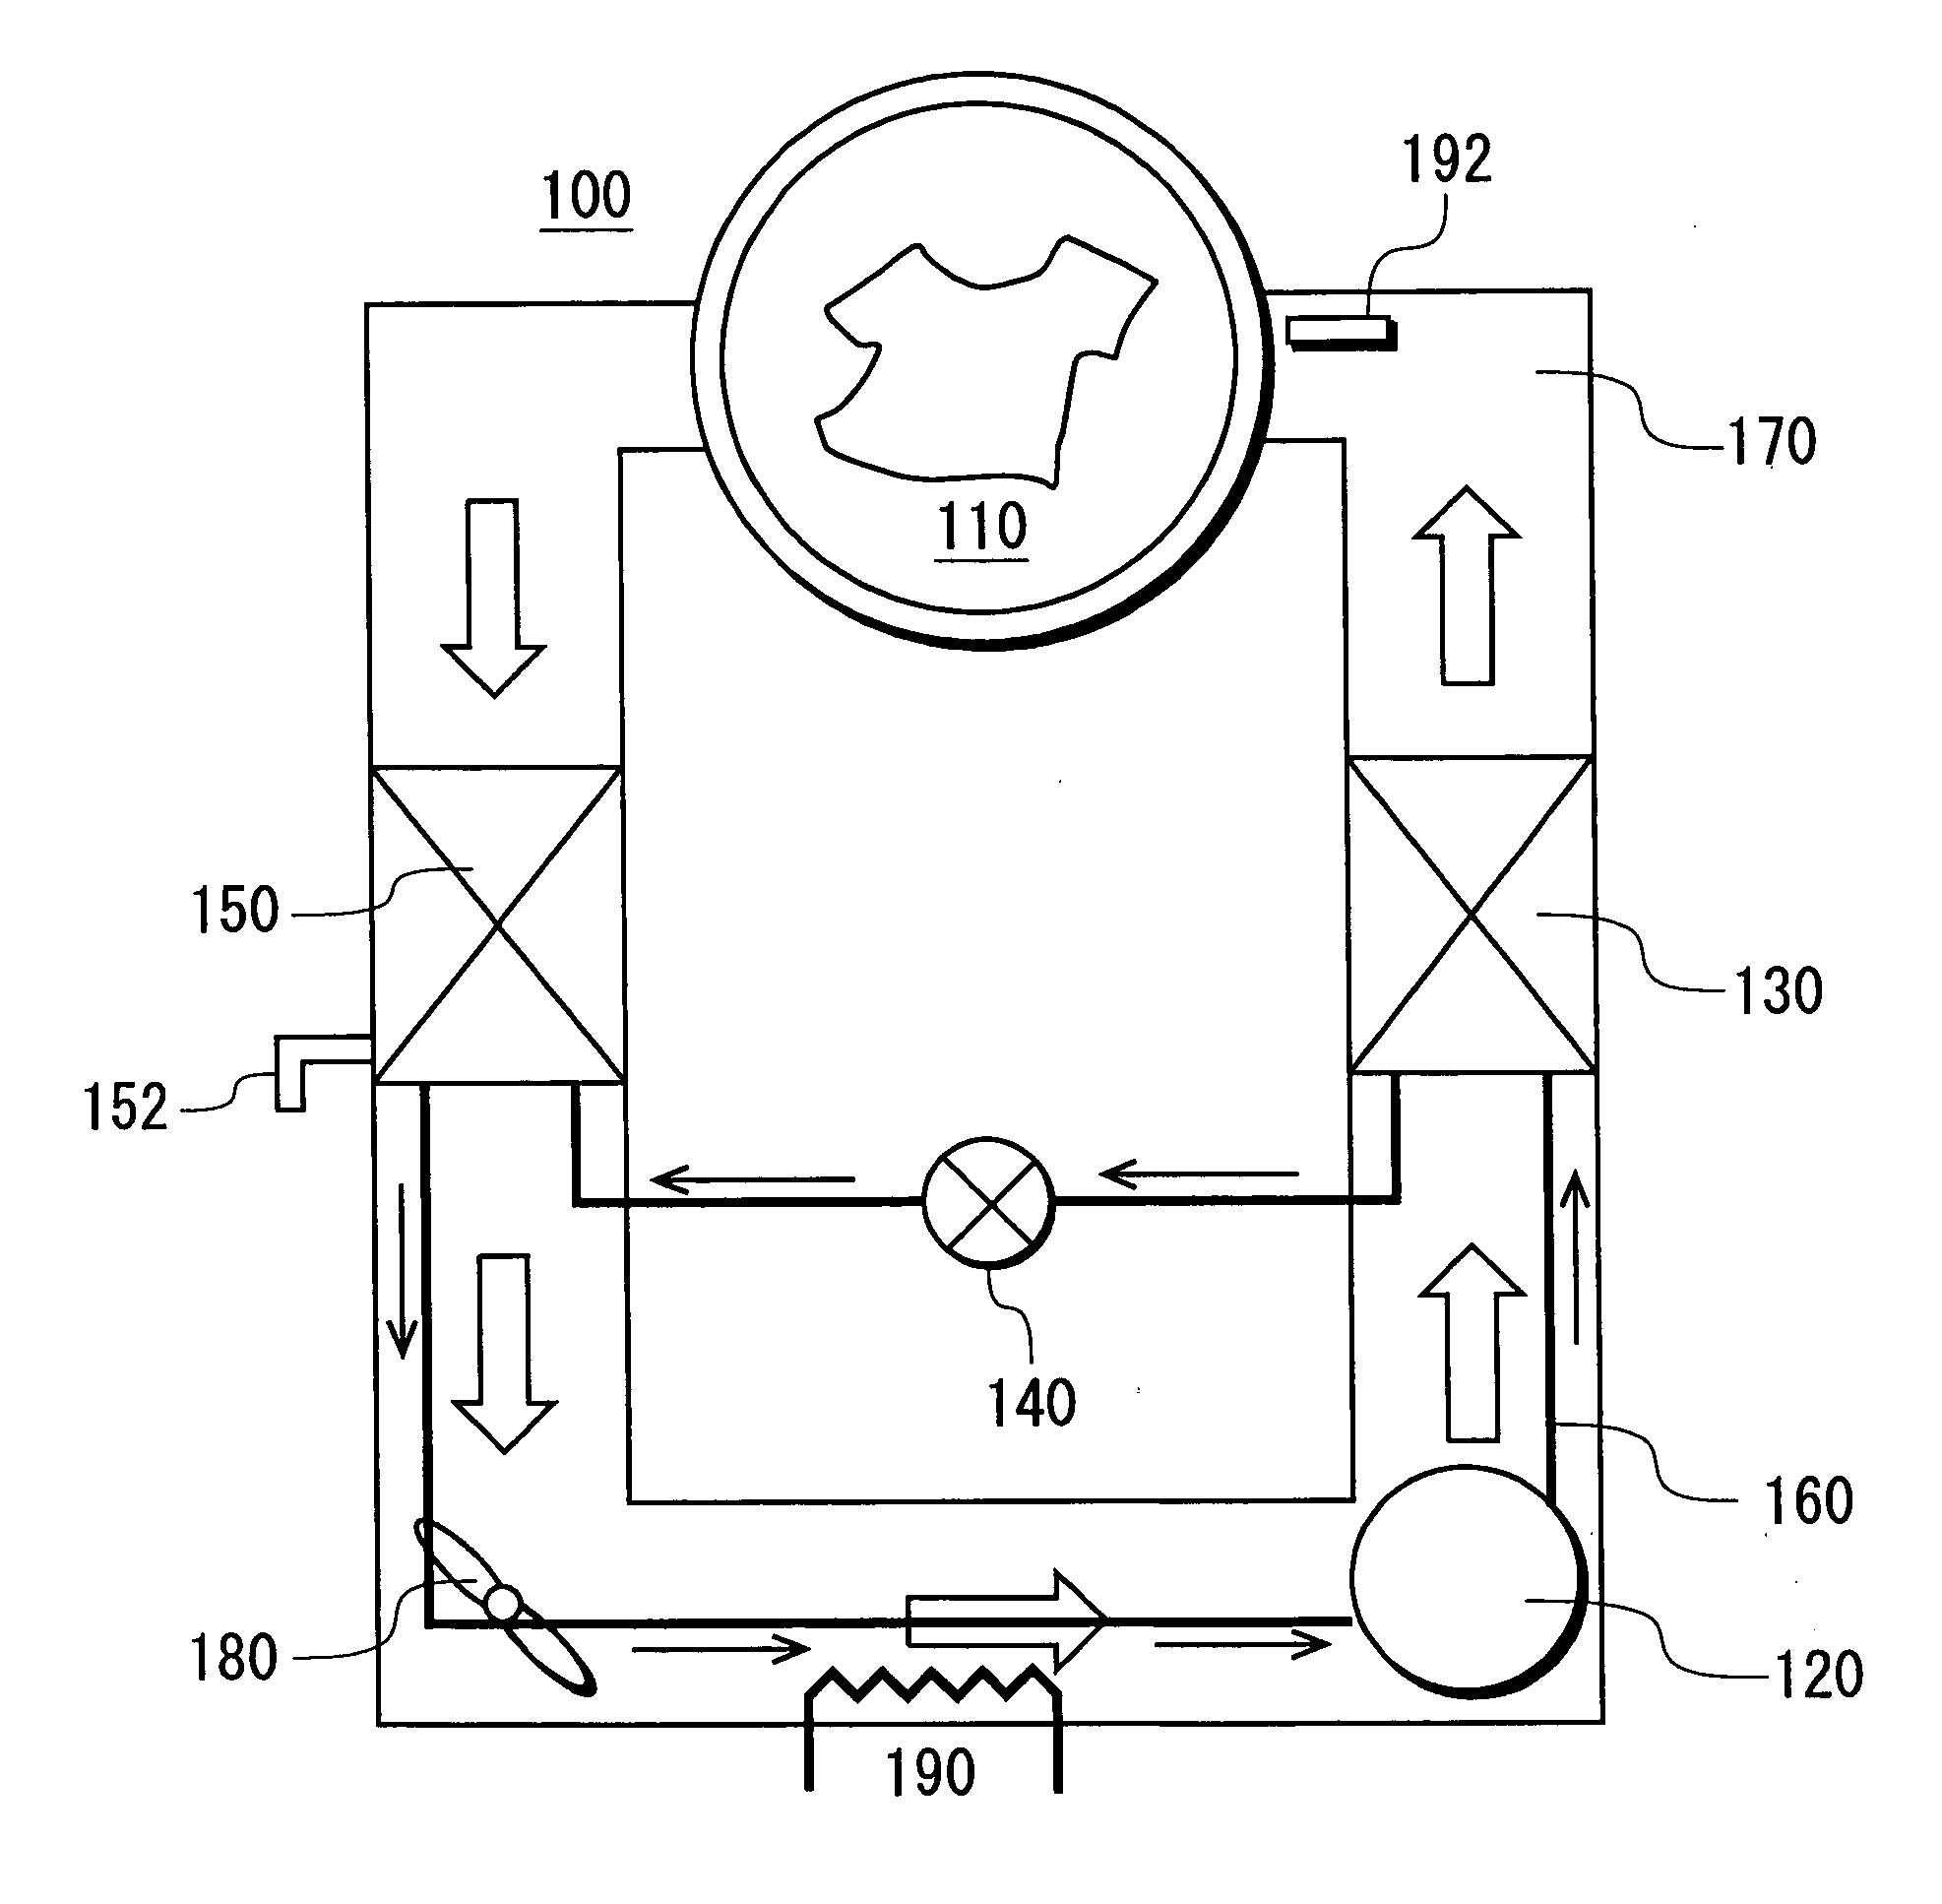 Drying apparatus, washing/drying apparatus, and operation methods of the apparatuses